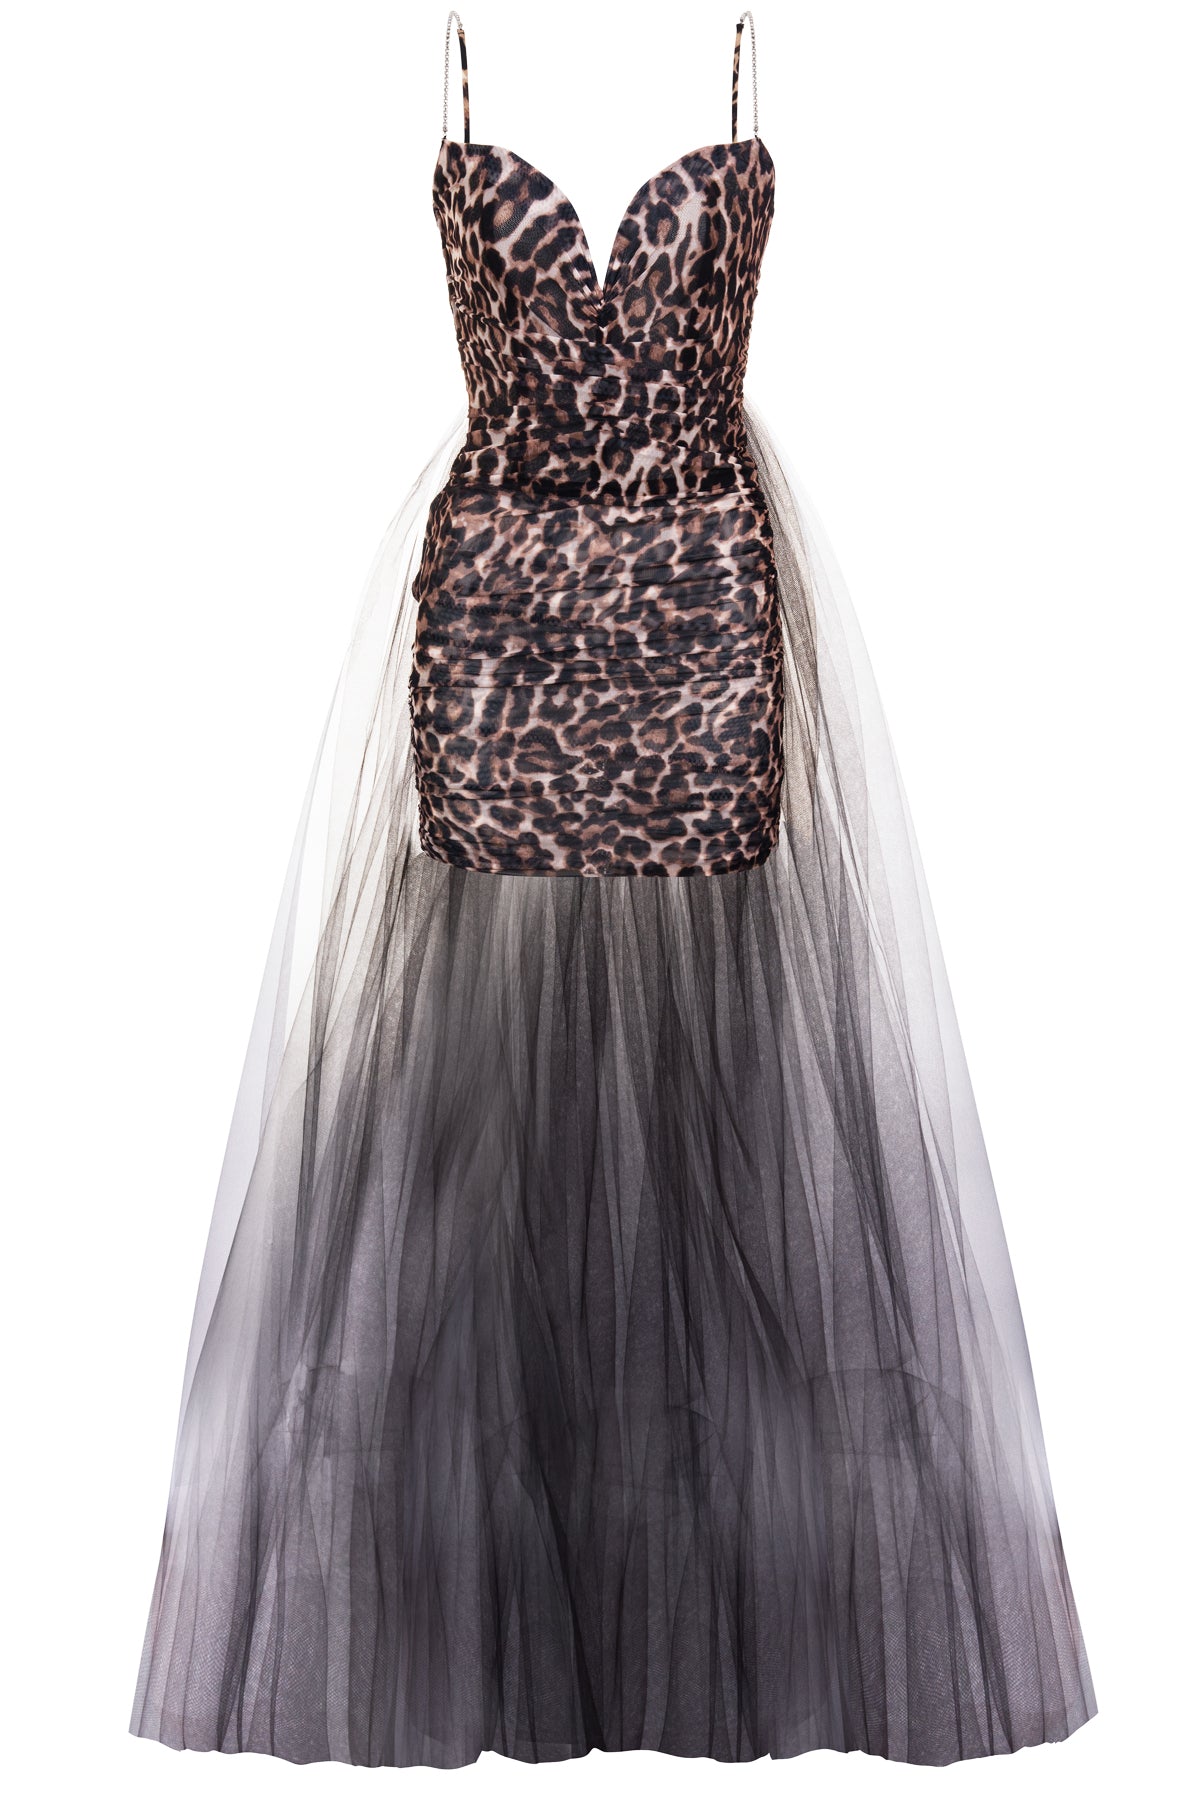 Monica Draped Leopard Mini Dress with Tulle Train- Made to Order